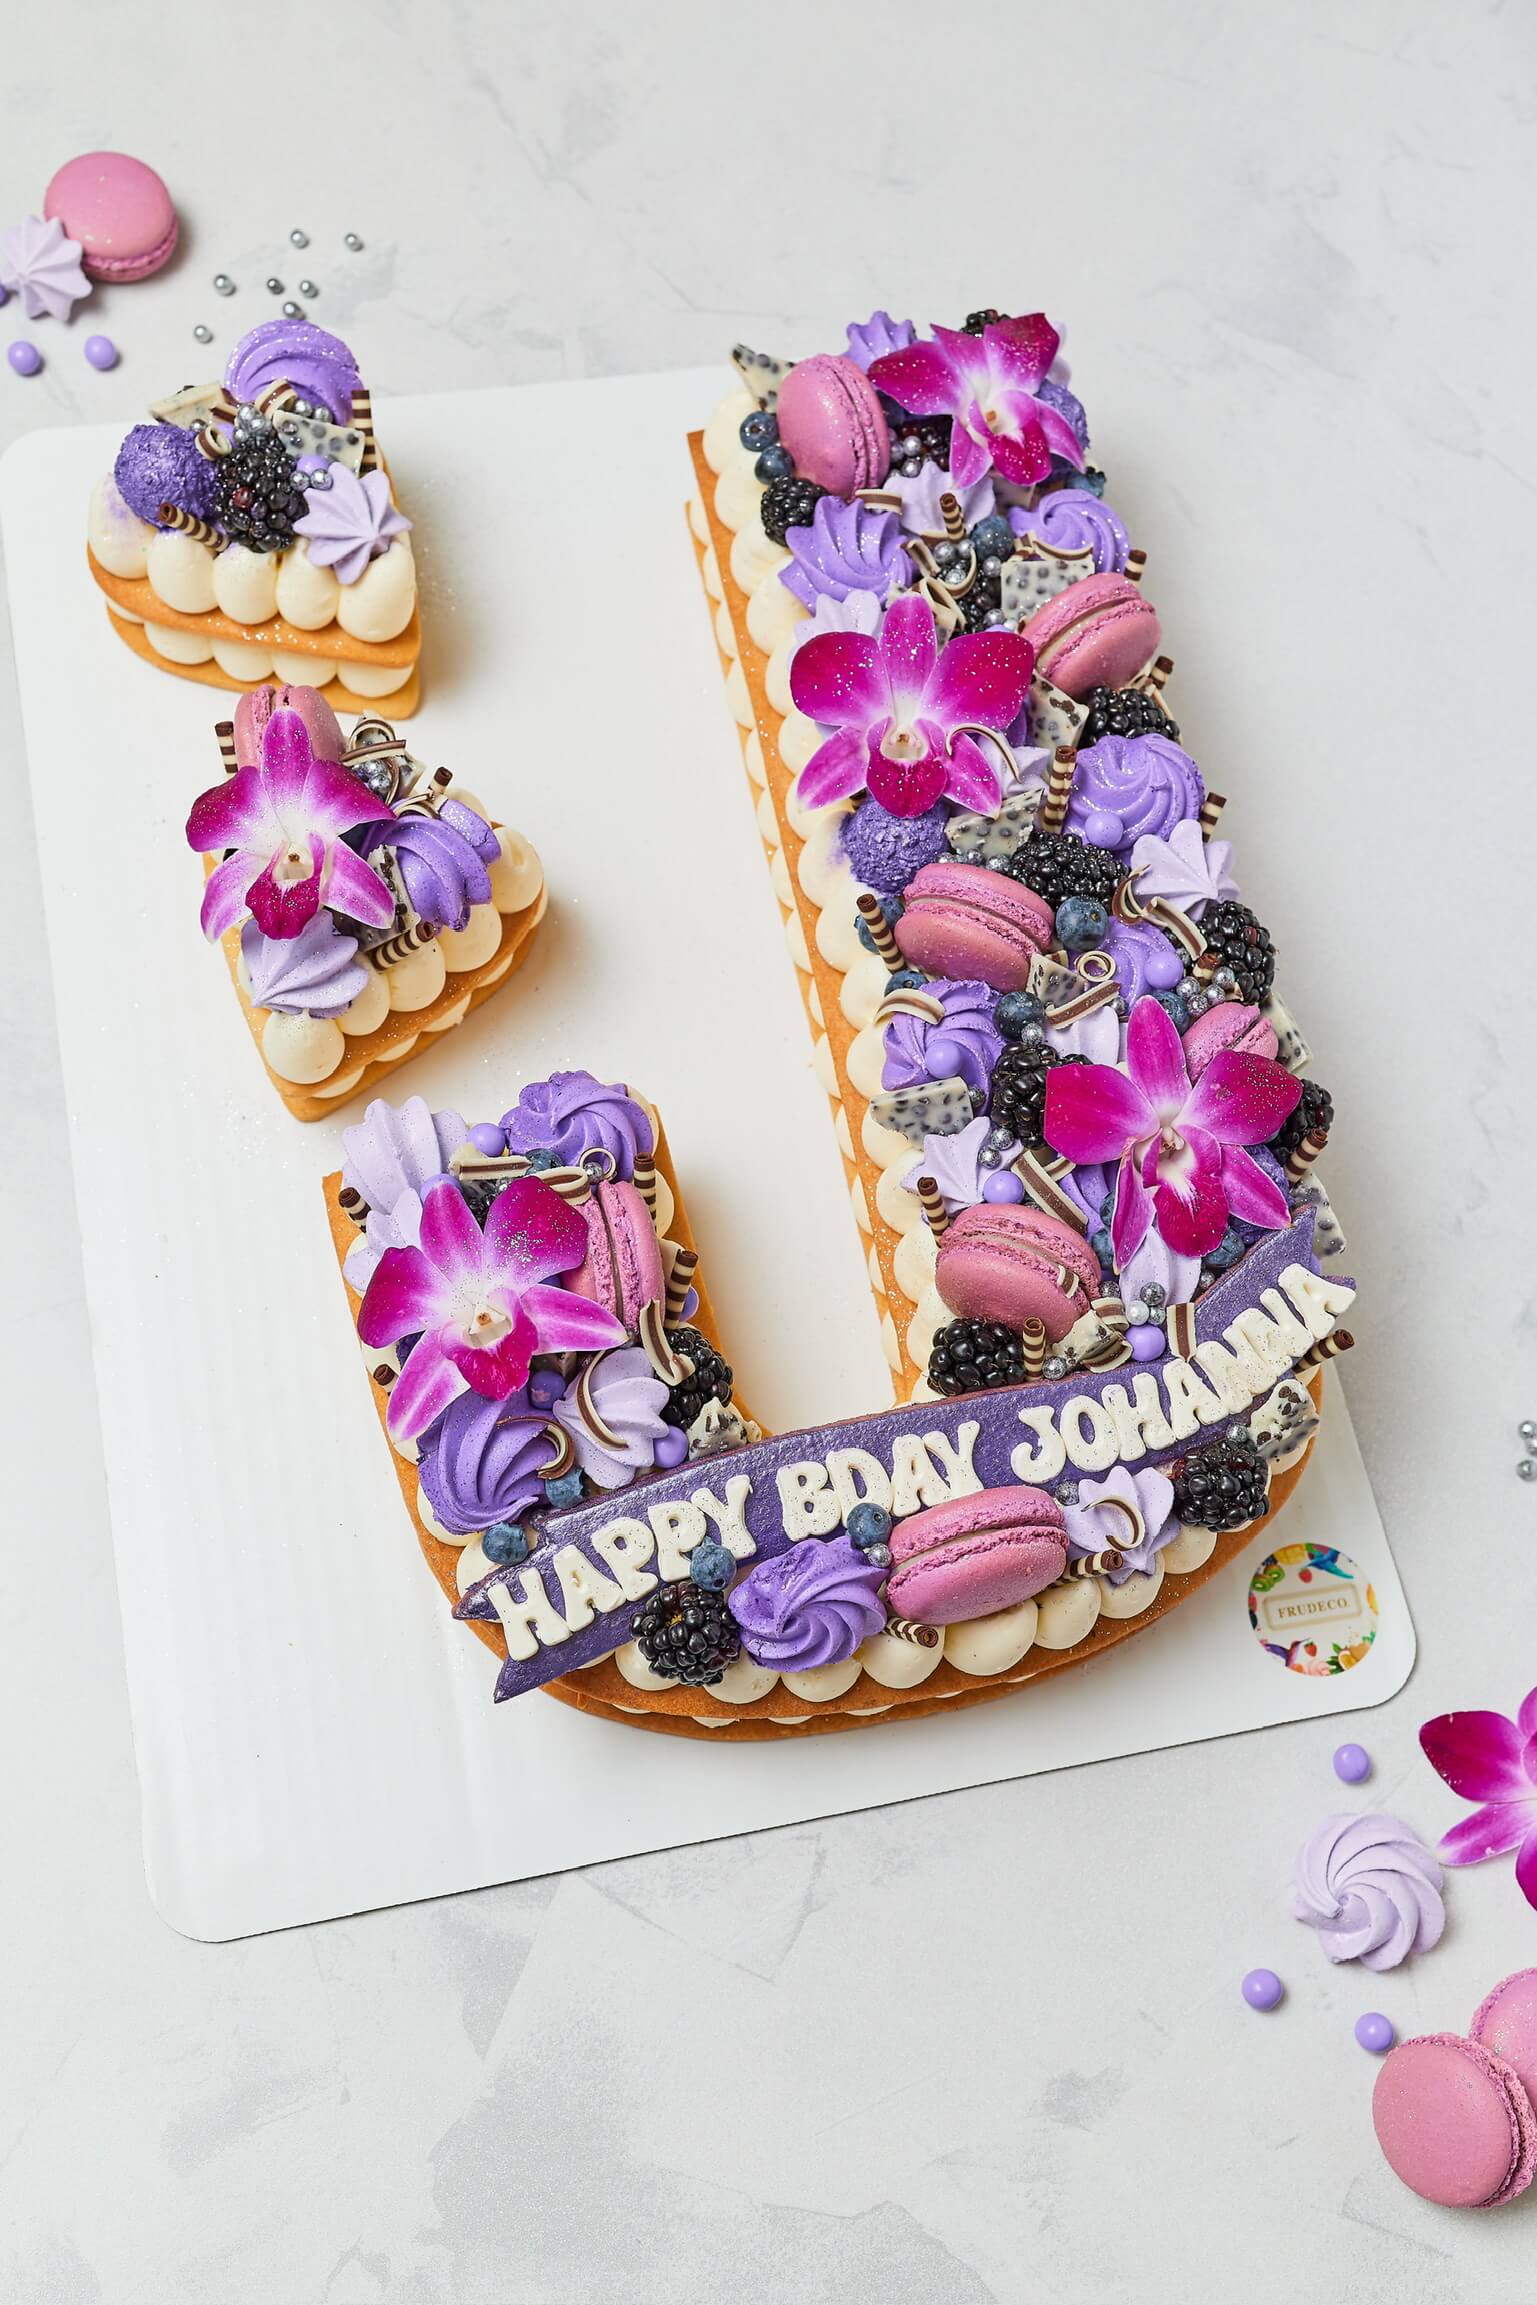 Small Number or Alphabet cake 10″x14″ (up to 15 servings)